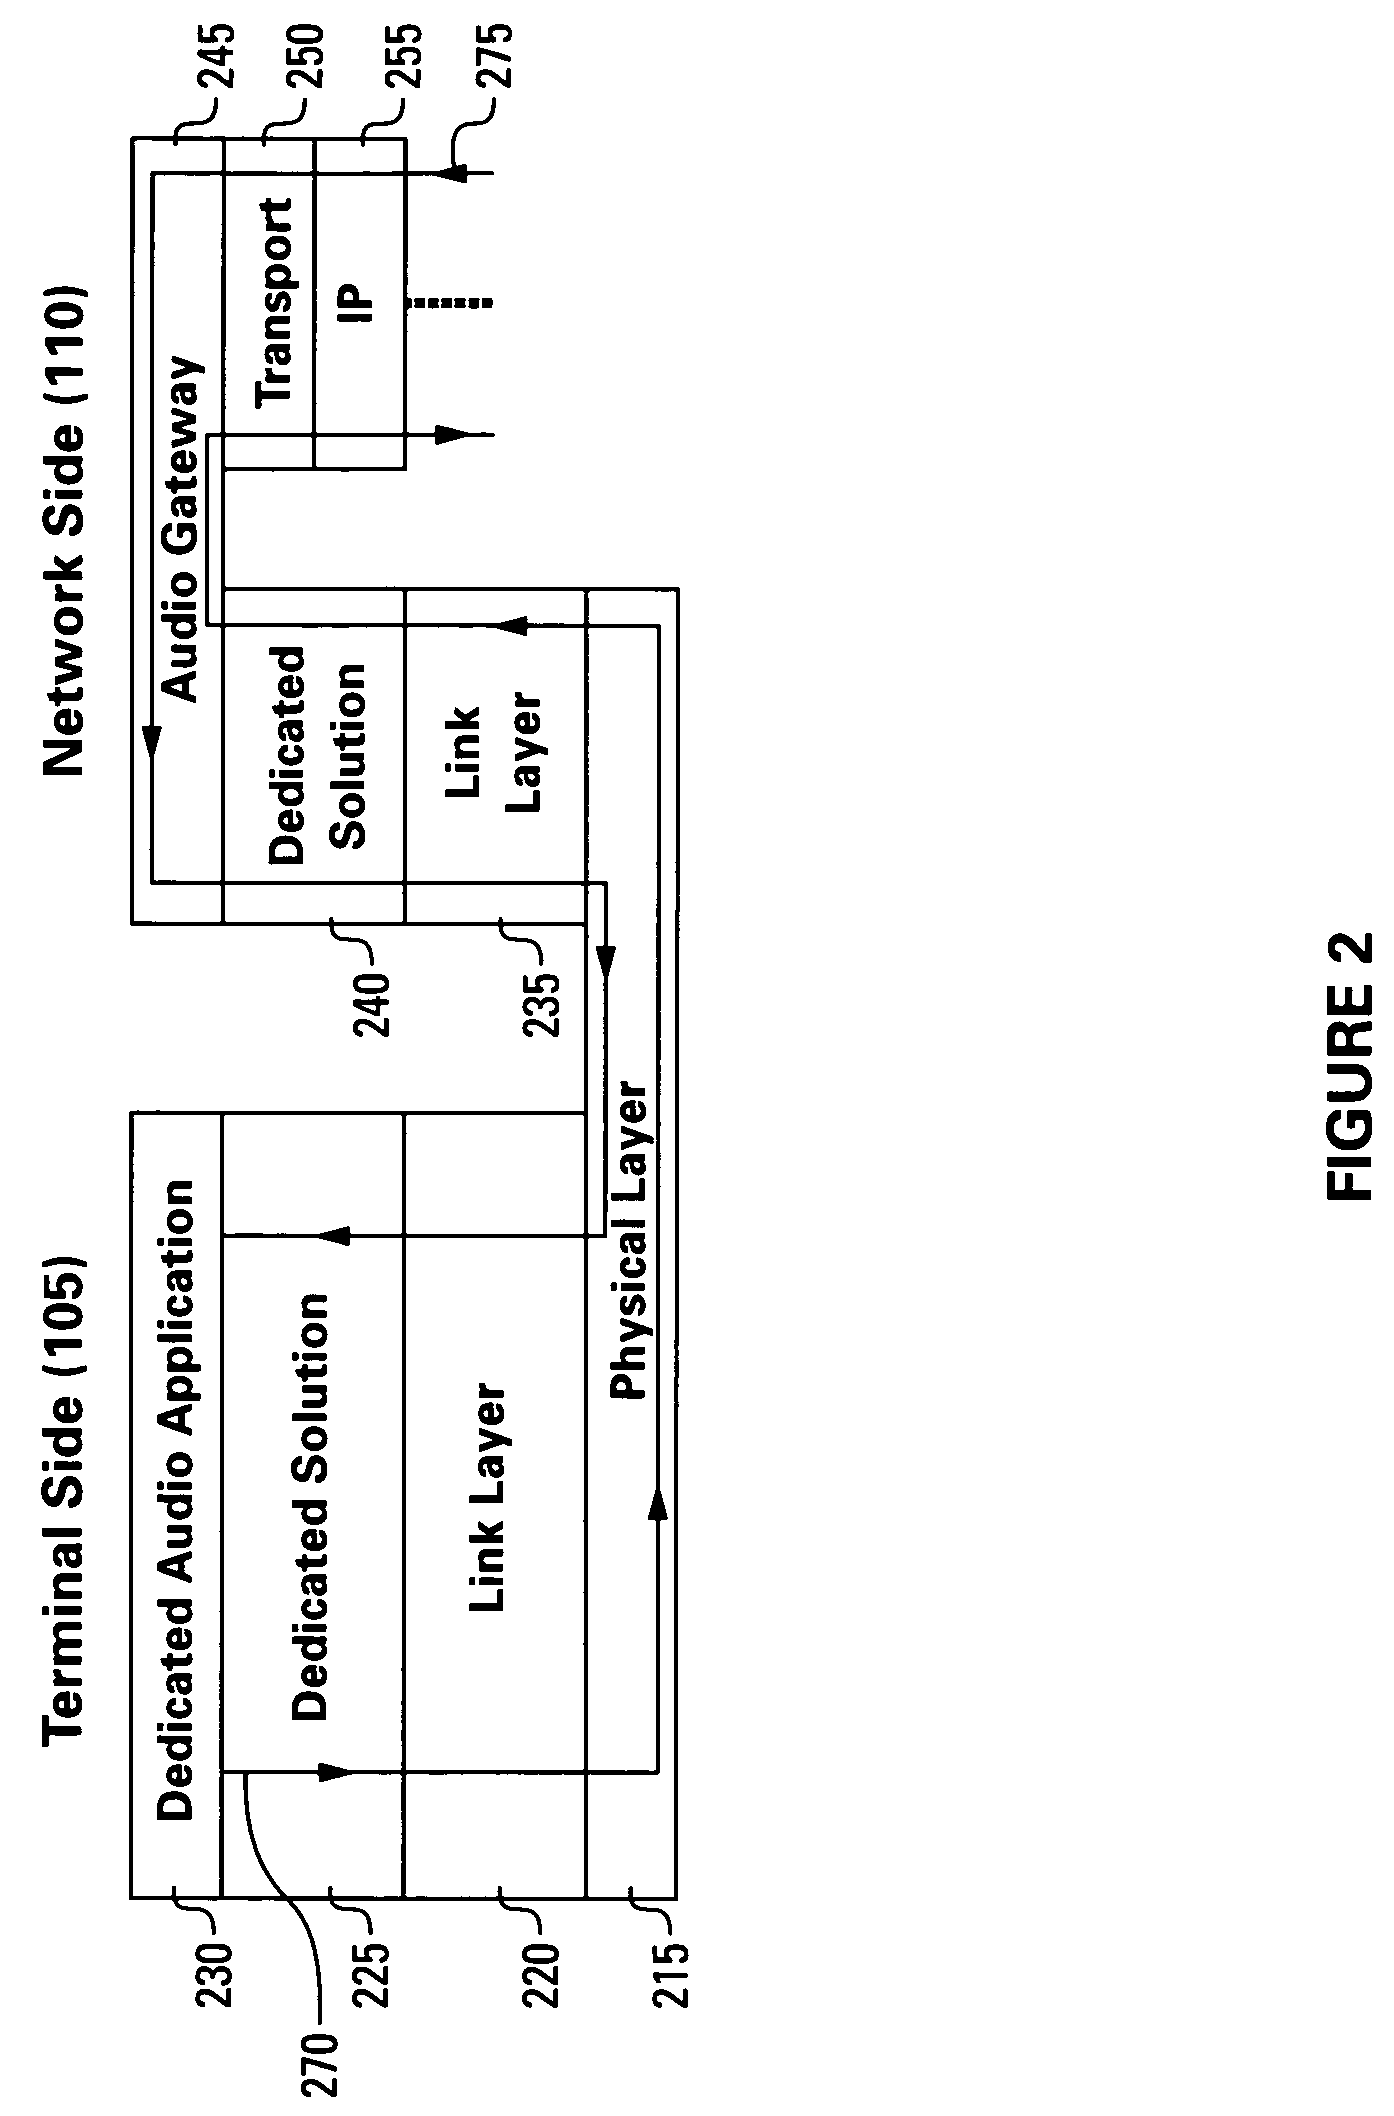 Systems and methods for VoIP wireless terminals